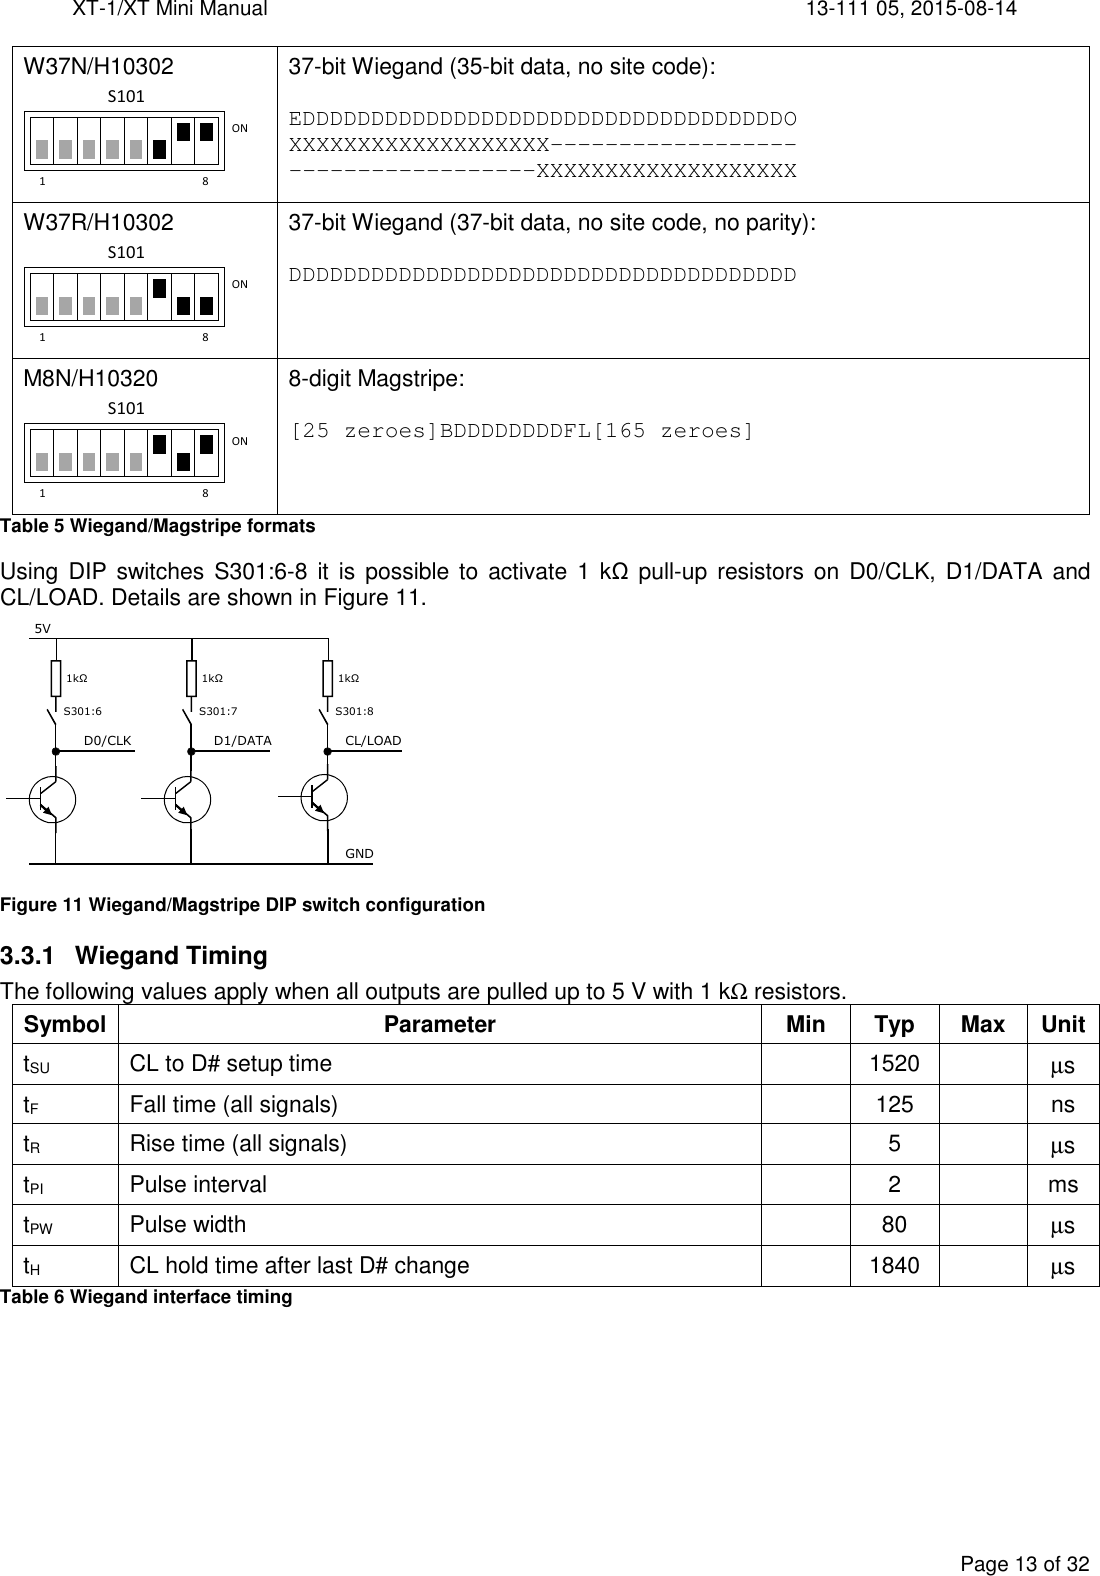 XT-1/XT Mini Manual     13-111 05, 2015-08-14  Page 13 of 32  W37N/H10302  37-bit Wiegand (35-bit data, no site code):  EDDDDDDDDDDDDDDDDDDDDDDDDDDDDDDDDDDDO XXXXXXXXXXXXXXXXXXX------------------ ------------------XXXXXXXXXXXXXXXXXXX W37R/H10302  37-bit Wiegand (37-bit data, no site code, no parity):  DDDDDDDDDDDDDDDDDDDDDDDDDDDDDDDDDDDDD M8N/H10320  8-digit Magstripe:  [25 zeroes]BDDDDDDDDFL[165 zeroes] Table 5 Wiegand/Magstripe formats Using  DIP switches S301:6-8 it is possible to activate 1 kΩ pull-up  resistors on D0/CLK,  D1/DATA  and CL/LOAD. Details are shown in Figure 11.  Figure 11 Wiegand/Magstripe DIP switch configuration 3.3.1  Wiegand Timing The following values apply when all outputs are pulled up to 5 V with 1 kΩ resistors. Symbol Parameter Min Typ Max Unit tSU  CL to D# setup time    1520    µs tF  Fall time (all signals)    125    ns tR  Rise time (all signals)    5    µs tPI  Pulse interval    2    ms tPW  Pulse width    80    µs tH  CL hold time after last D# change    1840    µs Table 6 Wiegand interface timing 1 8ONS1011 8ONS1011 8ONS101 S301:6 1kΩ D0/CLK 5V  S301:7 1kΩ D1/DATA  S301:8 1kΩ CL/LOAD GND 